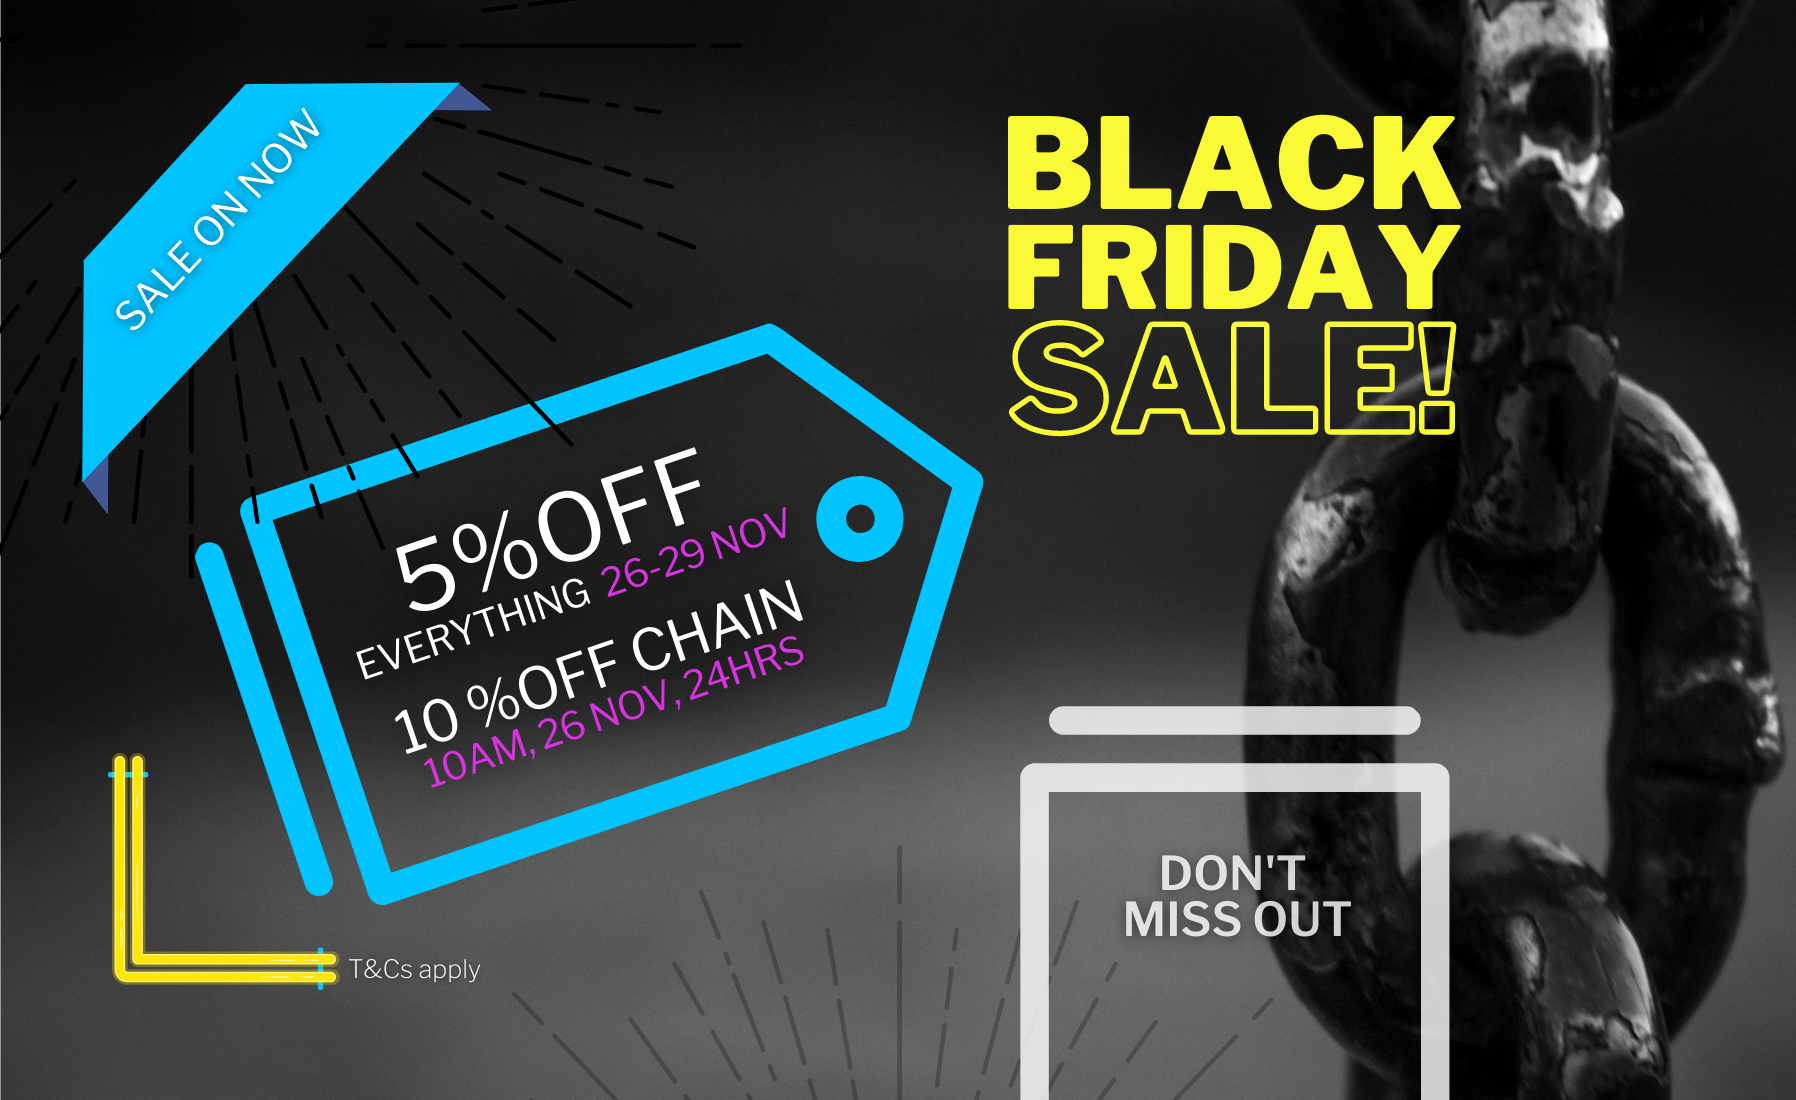 5% Off Everything with coupon.Huge Black Friday Sale. Hardware, Tools, Chain & More. Australia wide!